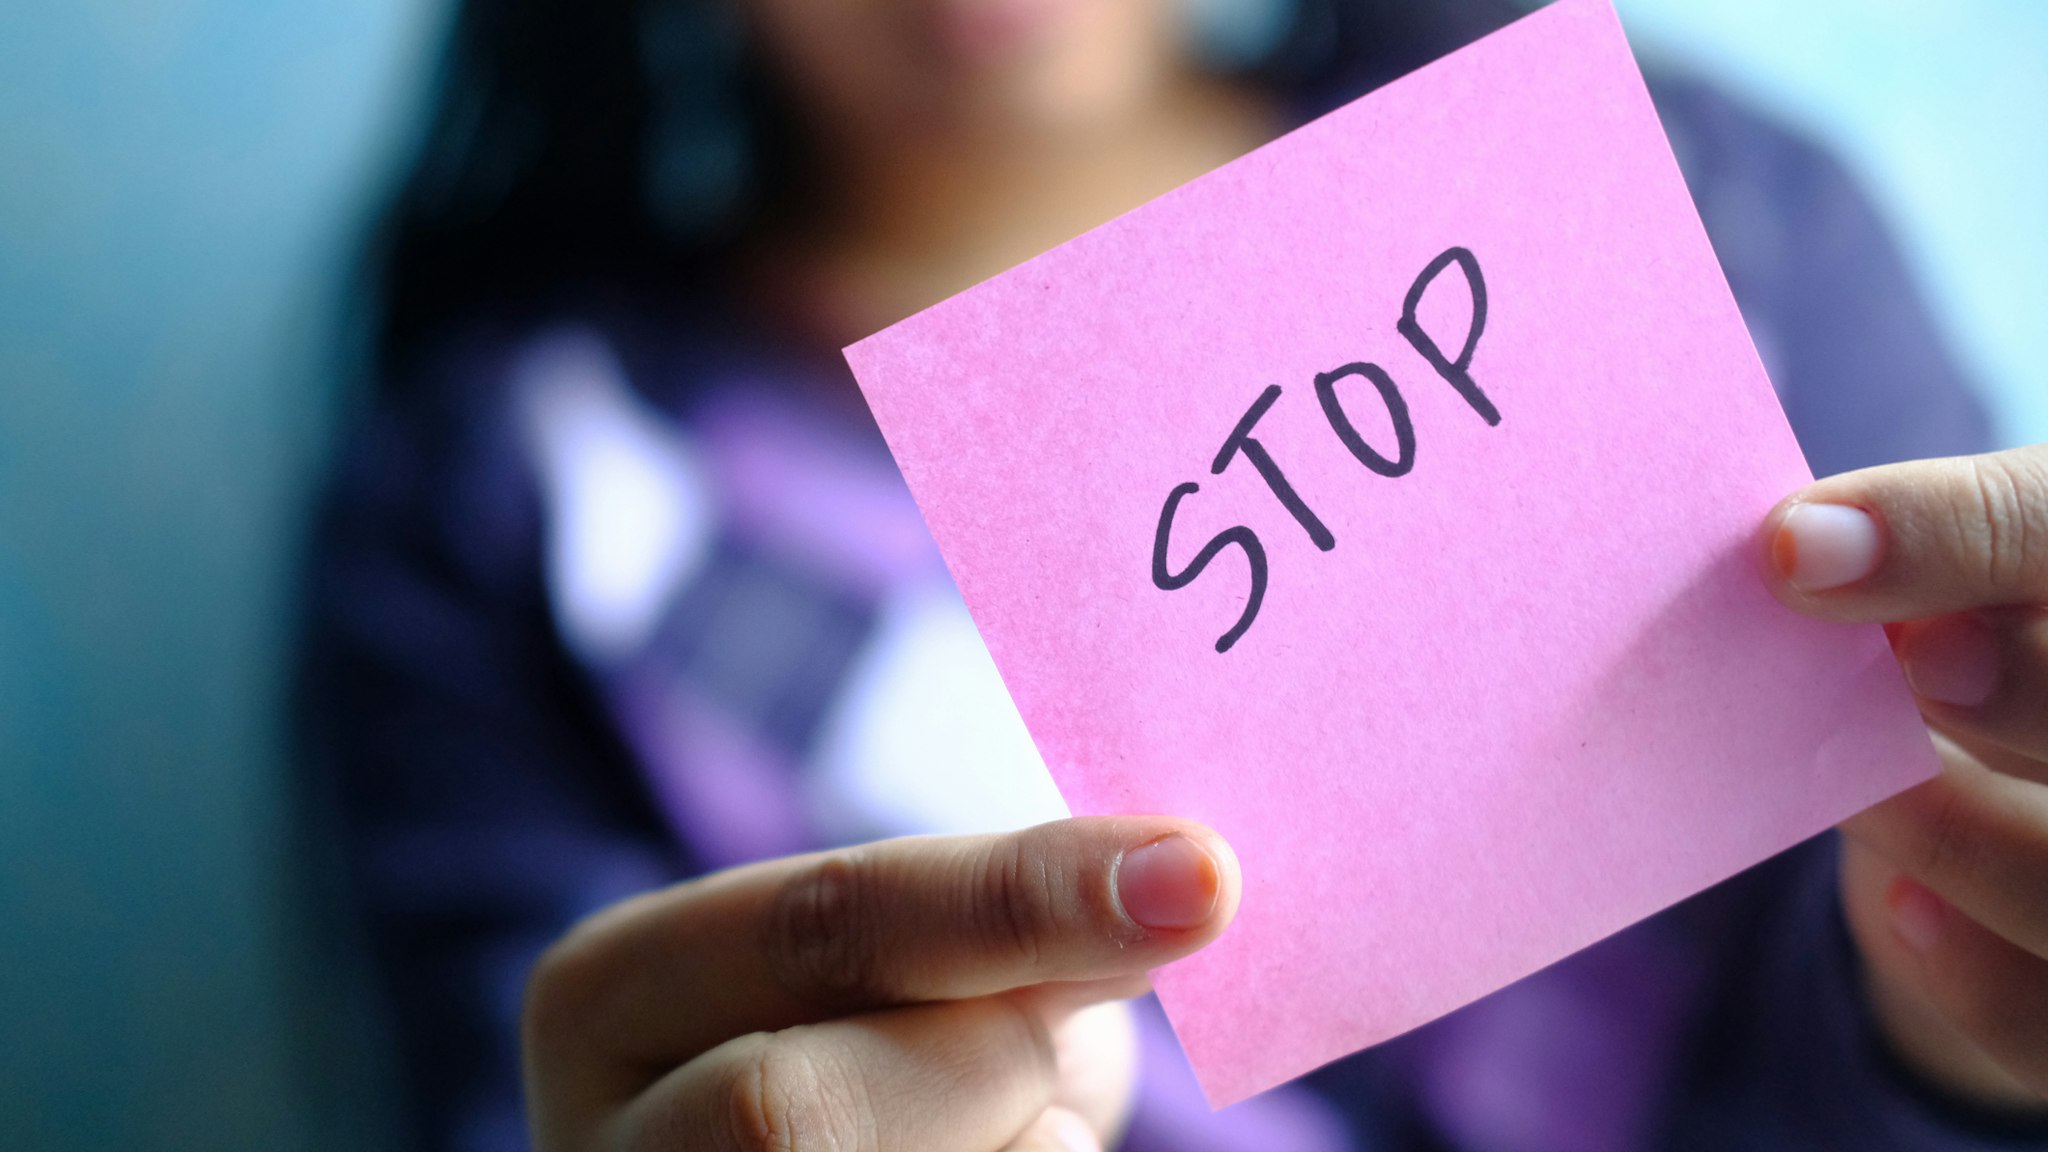 a young girl holding note pad with abuse text written